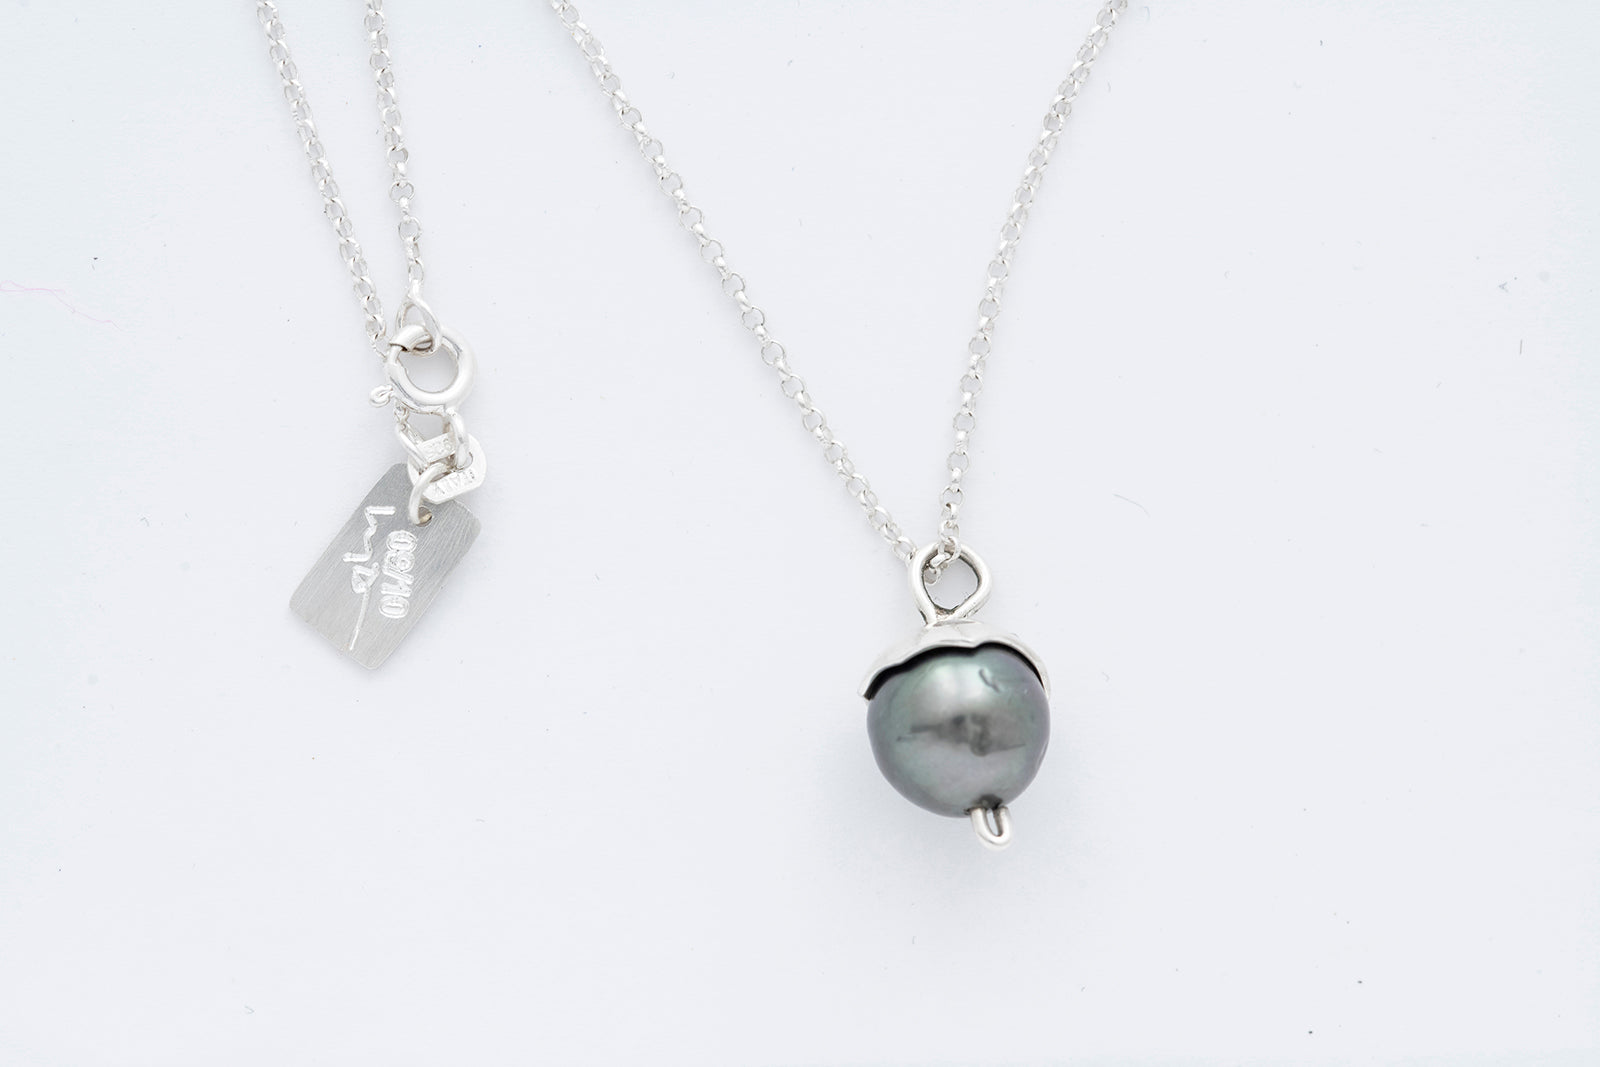 NOIR necklace w. tahitian pearl - Limited edition 09/10